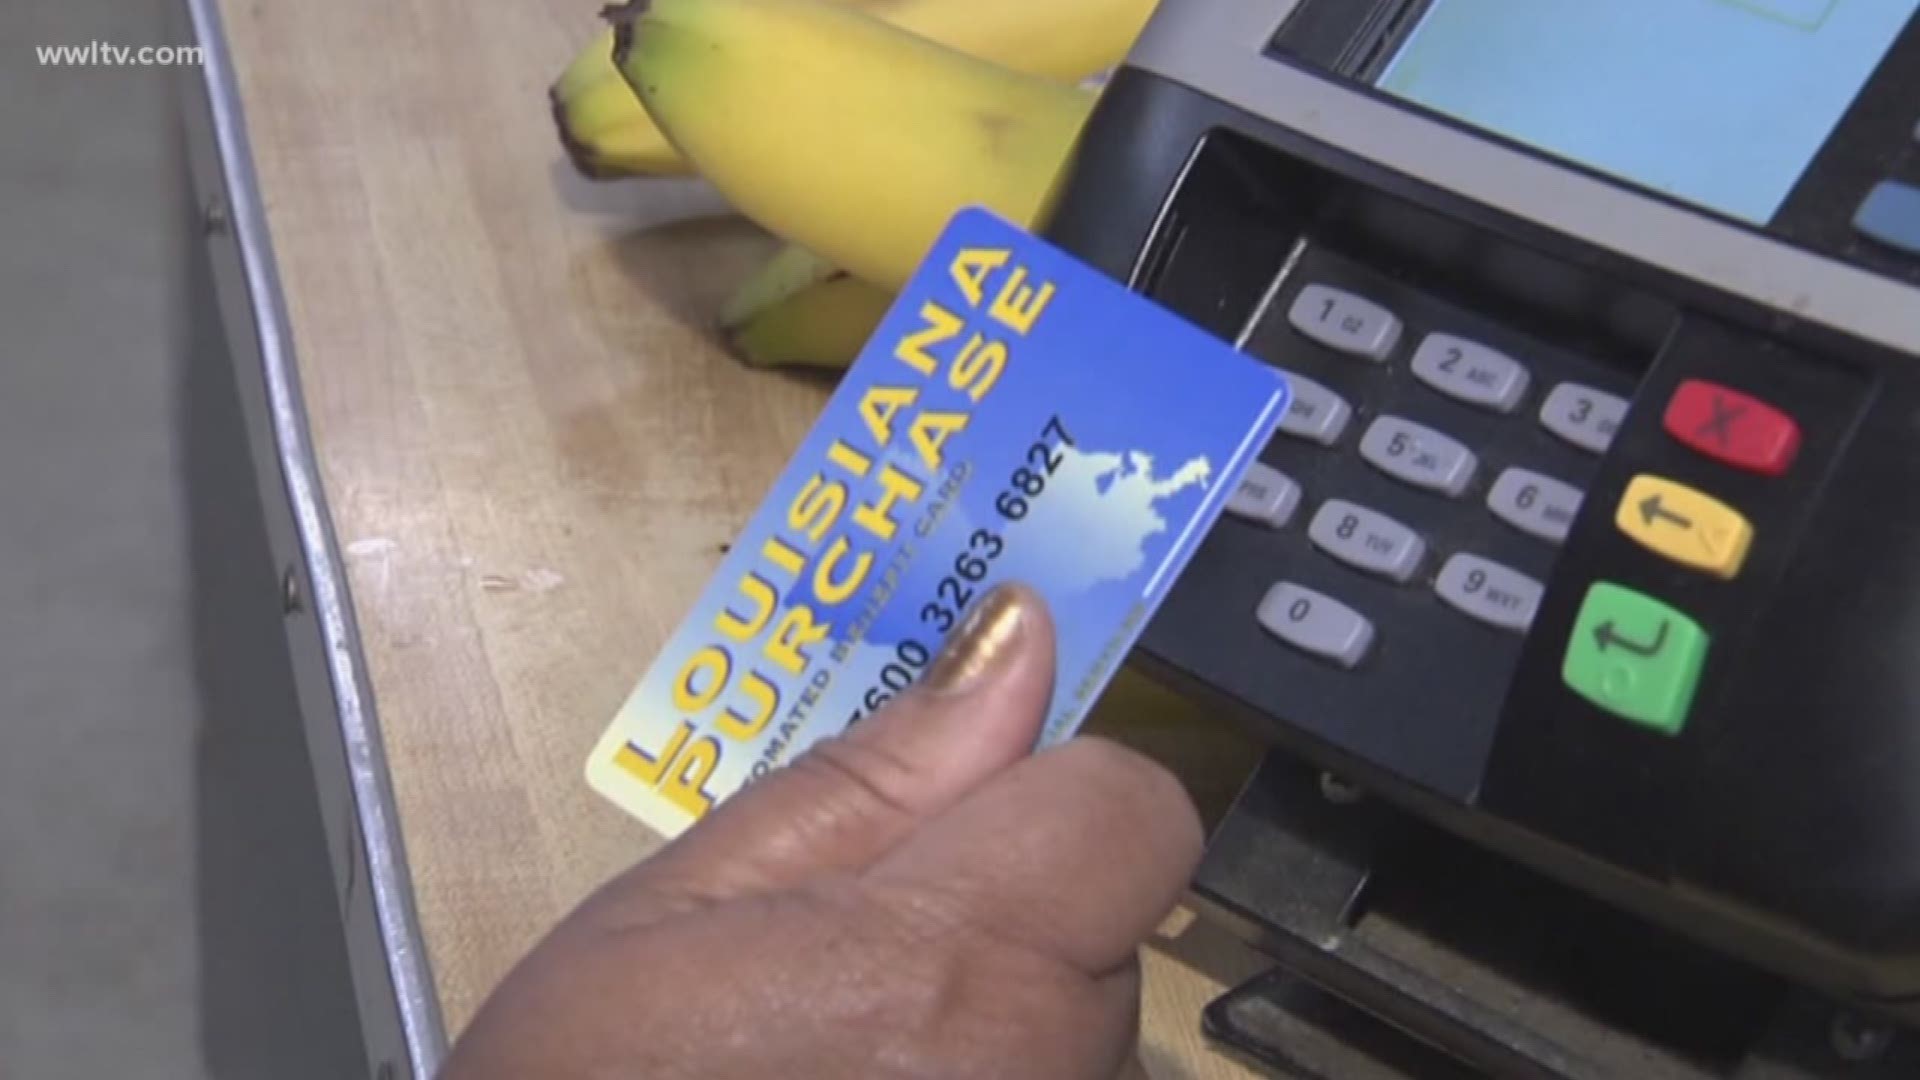 Louisiana food stamps benefits increase by 15 through June